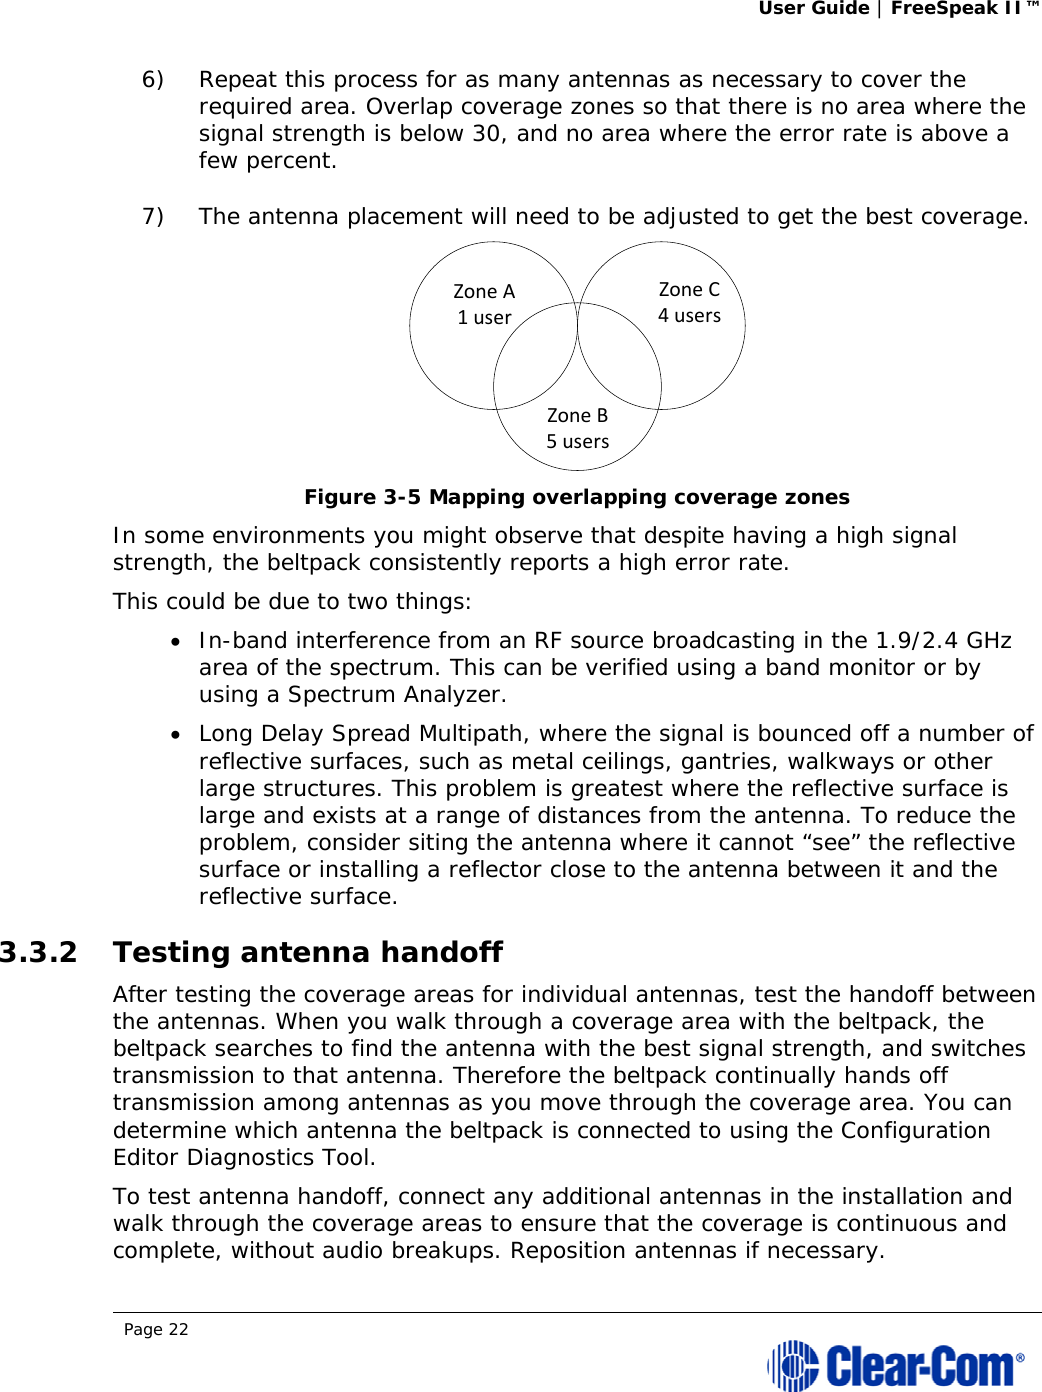 User Guide | FreeSpeak II™  Page 22  6) Repeat this process for as many antennas as necessary to cover the required area. Overlap coverage zones so that there is no area where the signal strength is below 30, and no area where the error rate is above a few percent.  7) The antenna placement will need to be adjusted to get the best coverage.  Figure 3-5 Mapping overlapping coverage zones In some environments you might observe that despite having a high signal strength, the beltpack consistently reports a high error rate. This could be due to two things:  In-band interference from an RF source broadcasting in the 1.9/2.4 GHz area of the spectrum. This can be verified using a band monitor or by using a Spectrum Analyzer.  Long Delay Spread Multipath, where the signal is bounced off a number of reflective surfaces, such as metal ceilings, gantries, walkways or other large structures. This problem is greatest where the reflective surface is large and exists at a range of distances from the antenna. To reduce the problem, consider siting the antenna where it cannot “see” the reflective surface or installing a reflector close to the antenna between it and the reflective surface. 3.3.2 Testing antenna handoff  After testing the coverage areas for individual antennas, test the handoff between the antennas. When you walk through a coverage area with the beltpack, the beltpack searches to find the antenna with the best signal strength, and switches transmission to that antenna. Therefore the beltpack continually hands off transmission among antennas as you move through the coverage area. You can determine which antenna the beltpack is connected to using the Configuration Editor Diagnostics Tool. To test antenna handoff, connect any additional antennas in the installation and walk through the coverage areas to ensure that the coverage is continuous and complete, without audio breakups. Reposition antennas if necessary.  ZoneA1userZoneC4usersZoneB5users